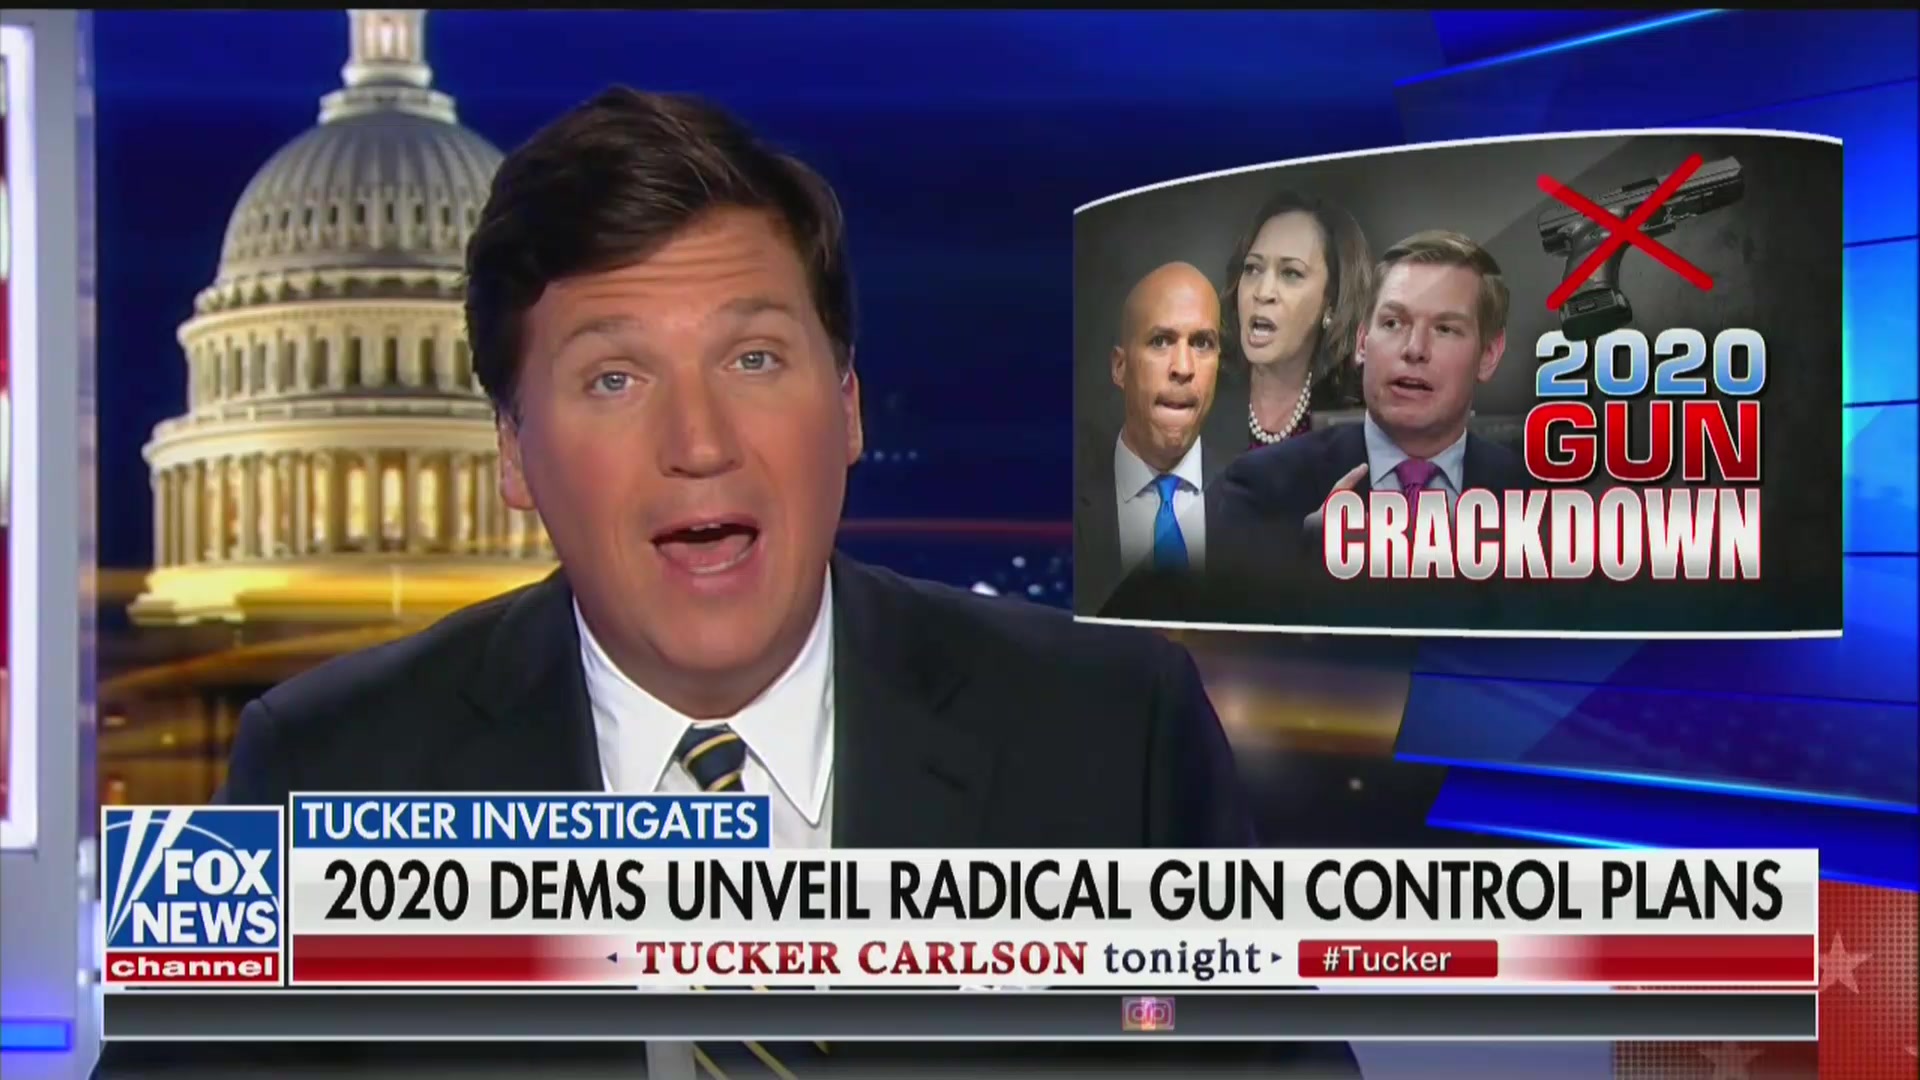 Tucker Carlson Suggests That All Democrats Are In Favor of Suicide